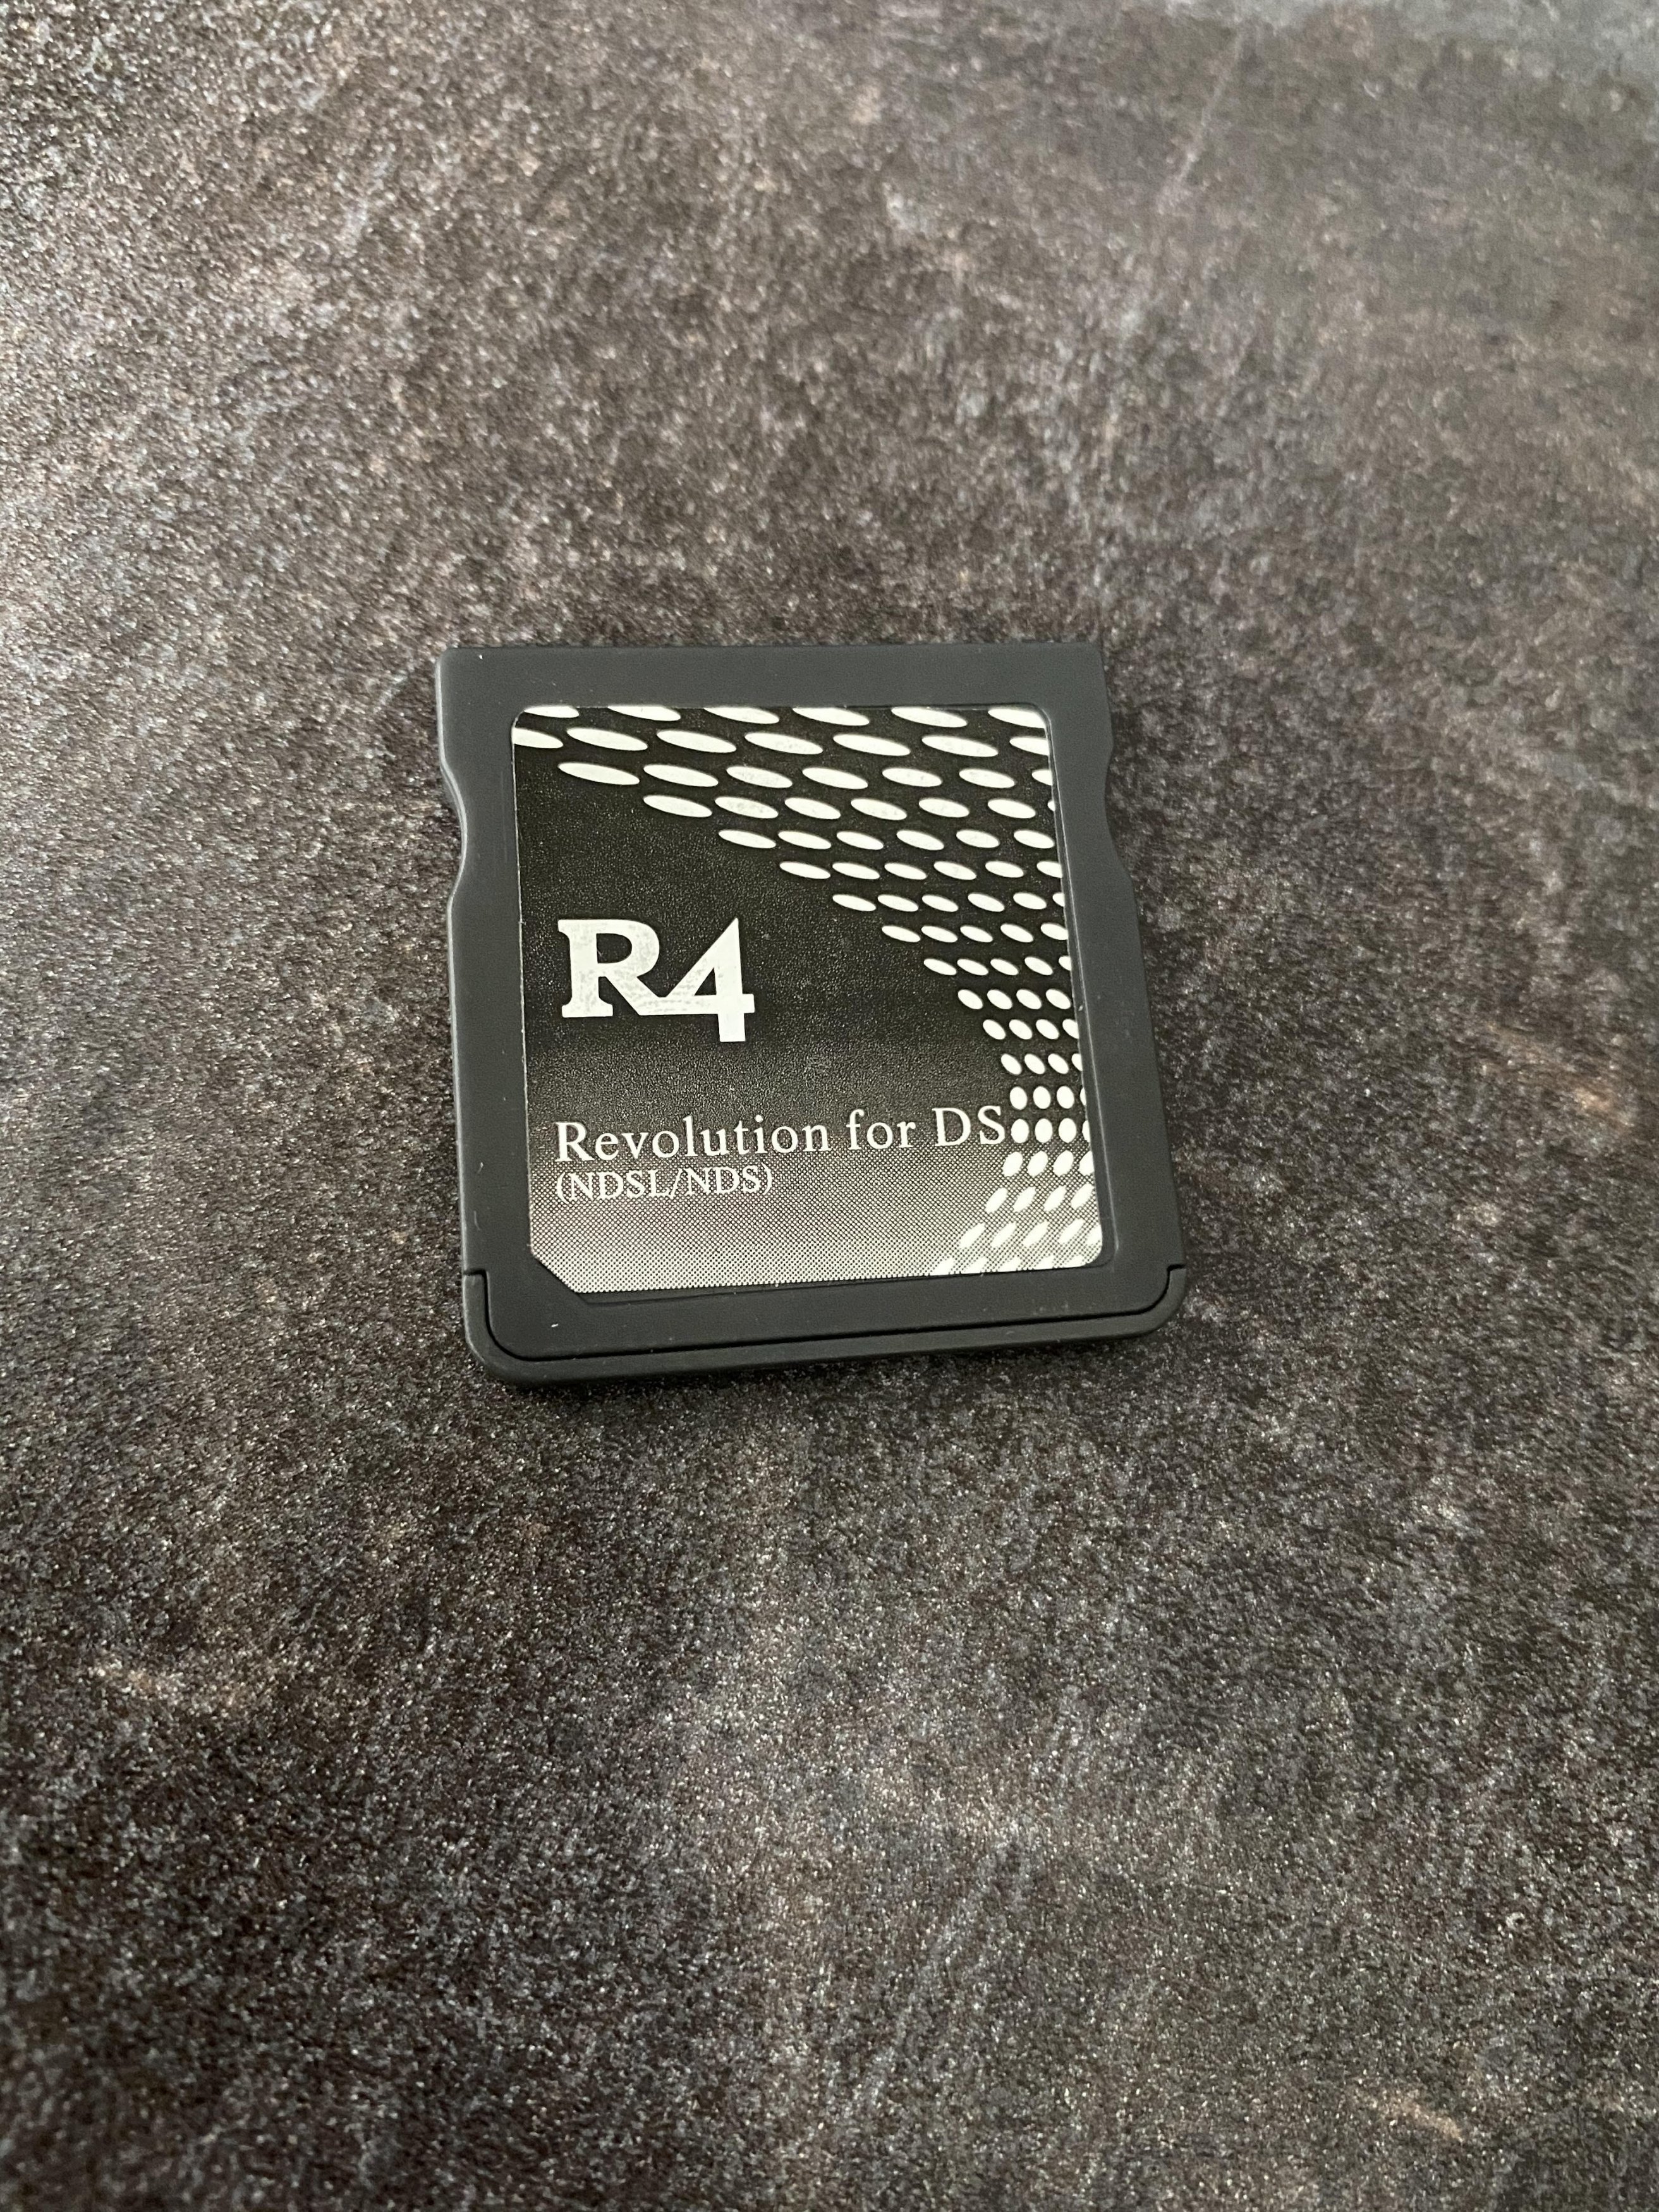 How can I find the correct firmware for this R4 card? | GBAtemp.net - The  Independent Video Game Community